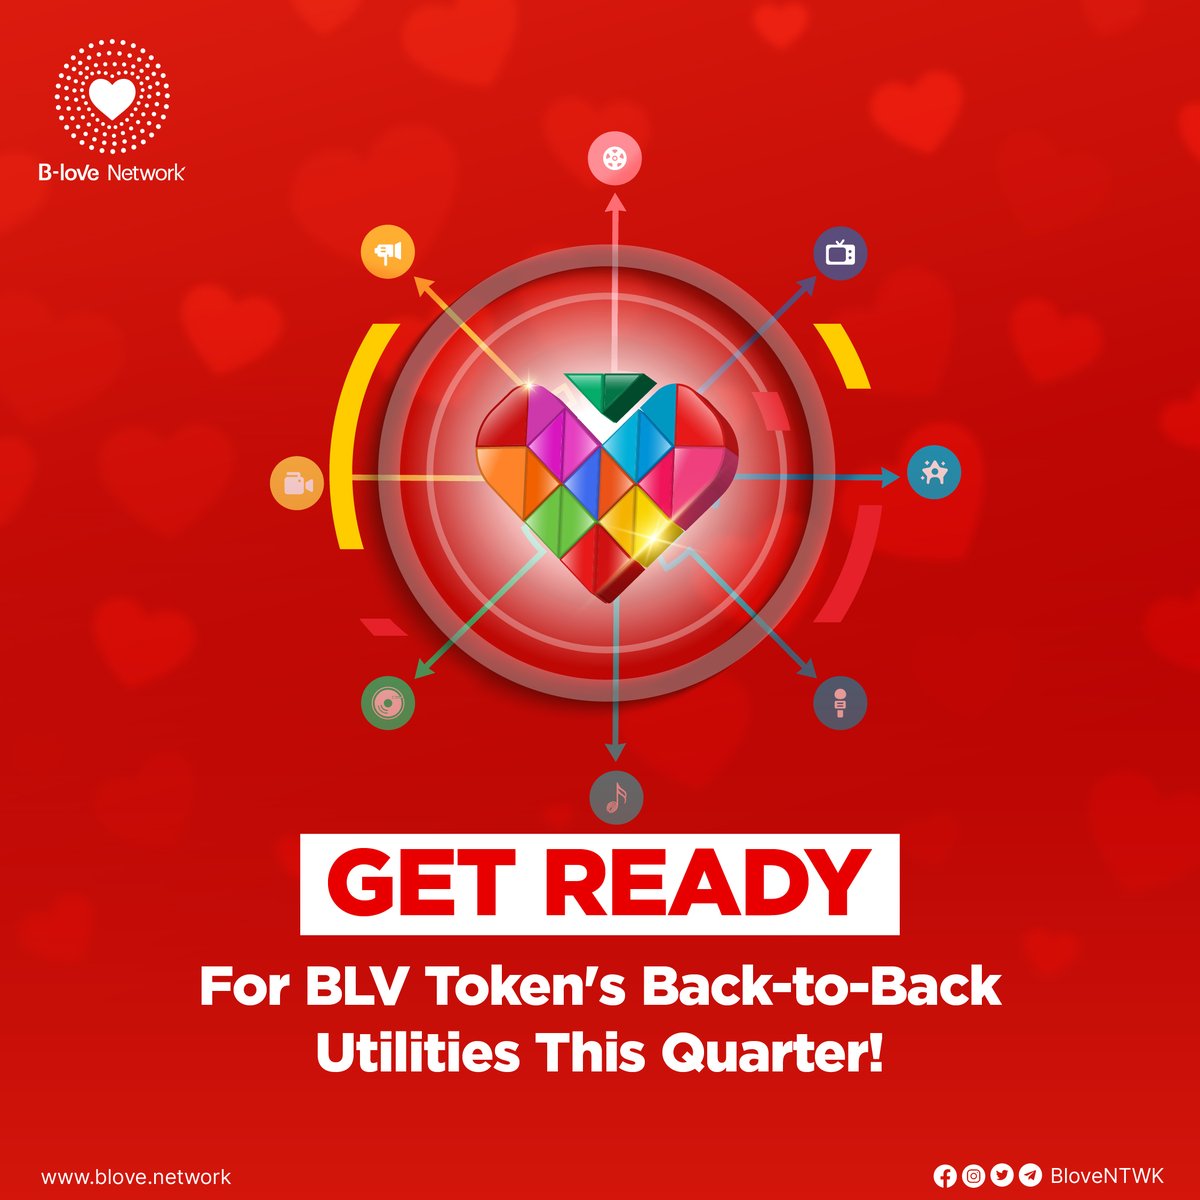 Unlocking Possibilities,
Blove Token's Utility Bonanza Approaches!⚡
Get ready for #blove token back to back utilities this quarter!
Embarking on a Visionary Journey in the #Crypto world,
Blove Token's Exemplary Real-World #Utilities Pave the Way for a Better Future
@BLoveNTWK